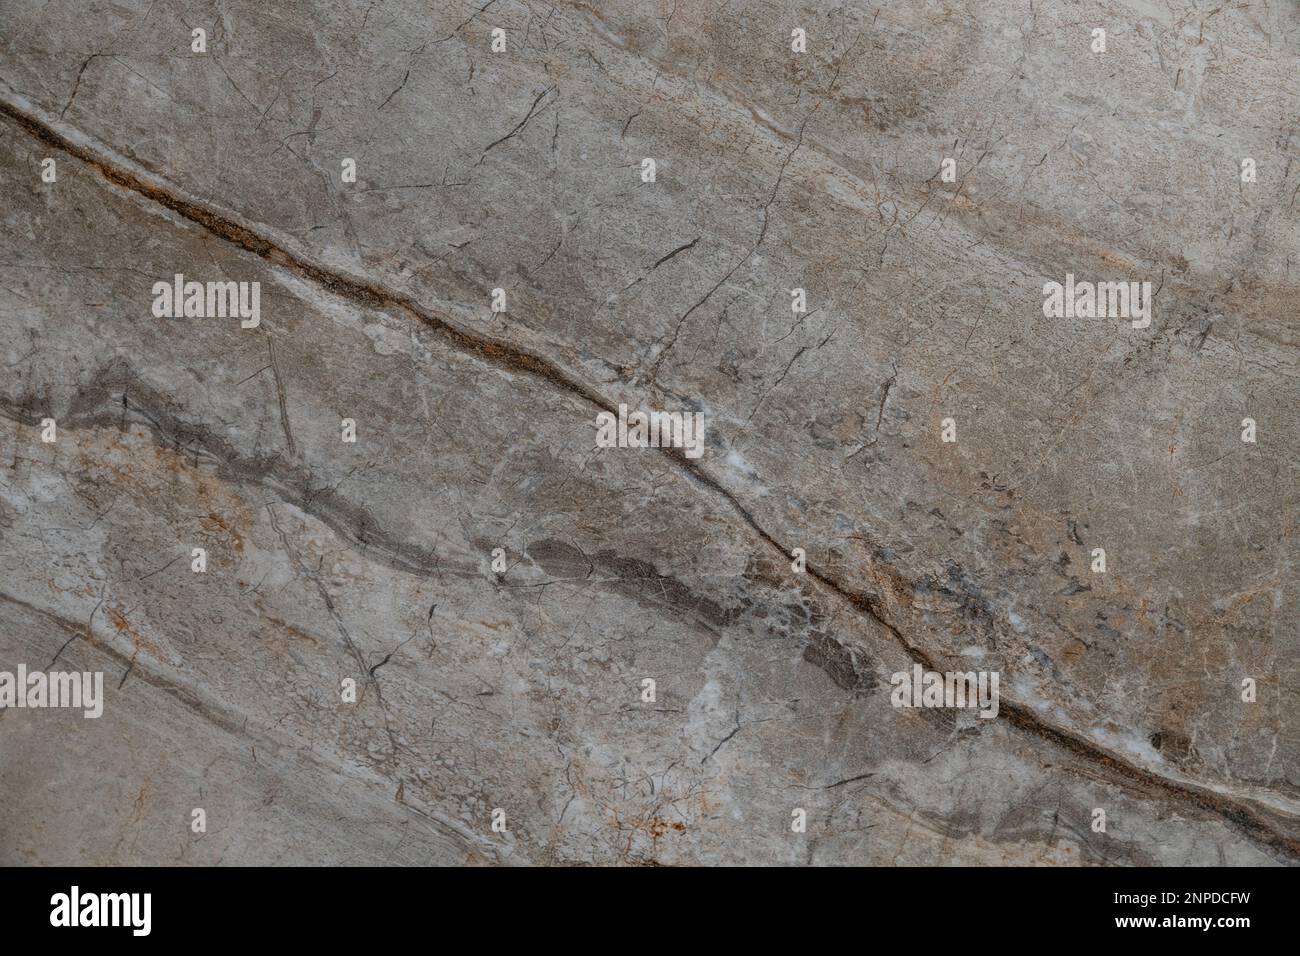 Brown marble pattern with swirling lines and uneven streaks, in natural brown and beige colors, smooth and glossy background resembling marble stone Stock Photo